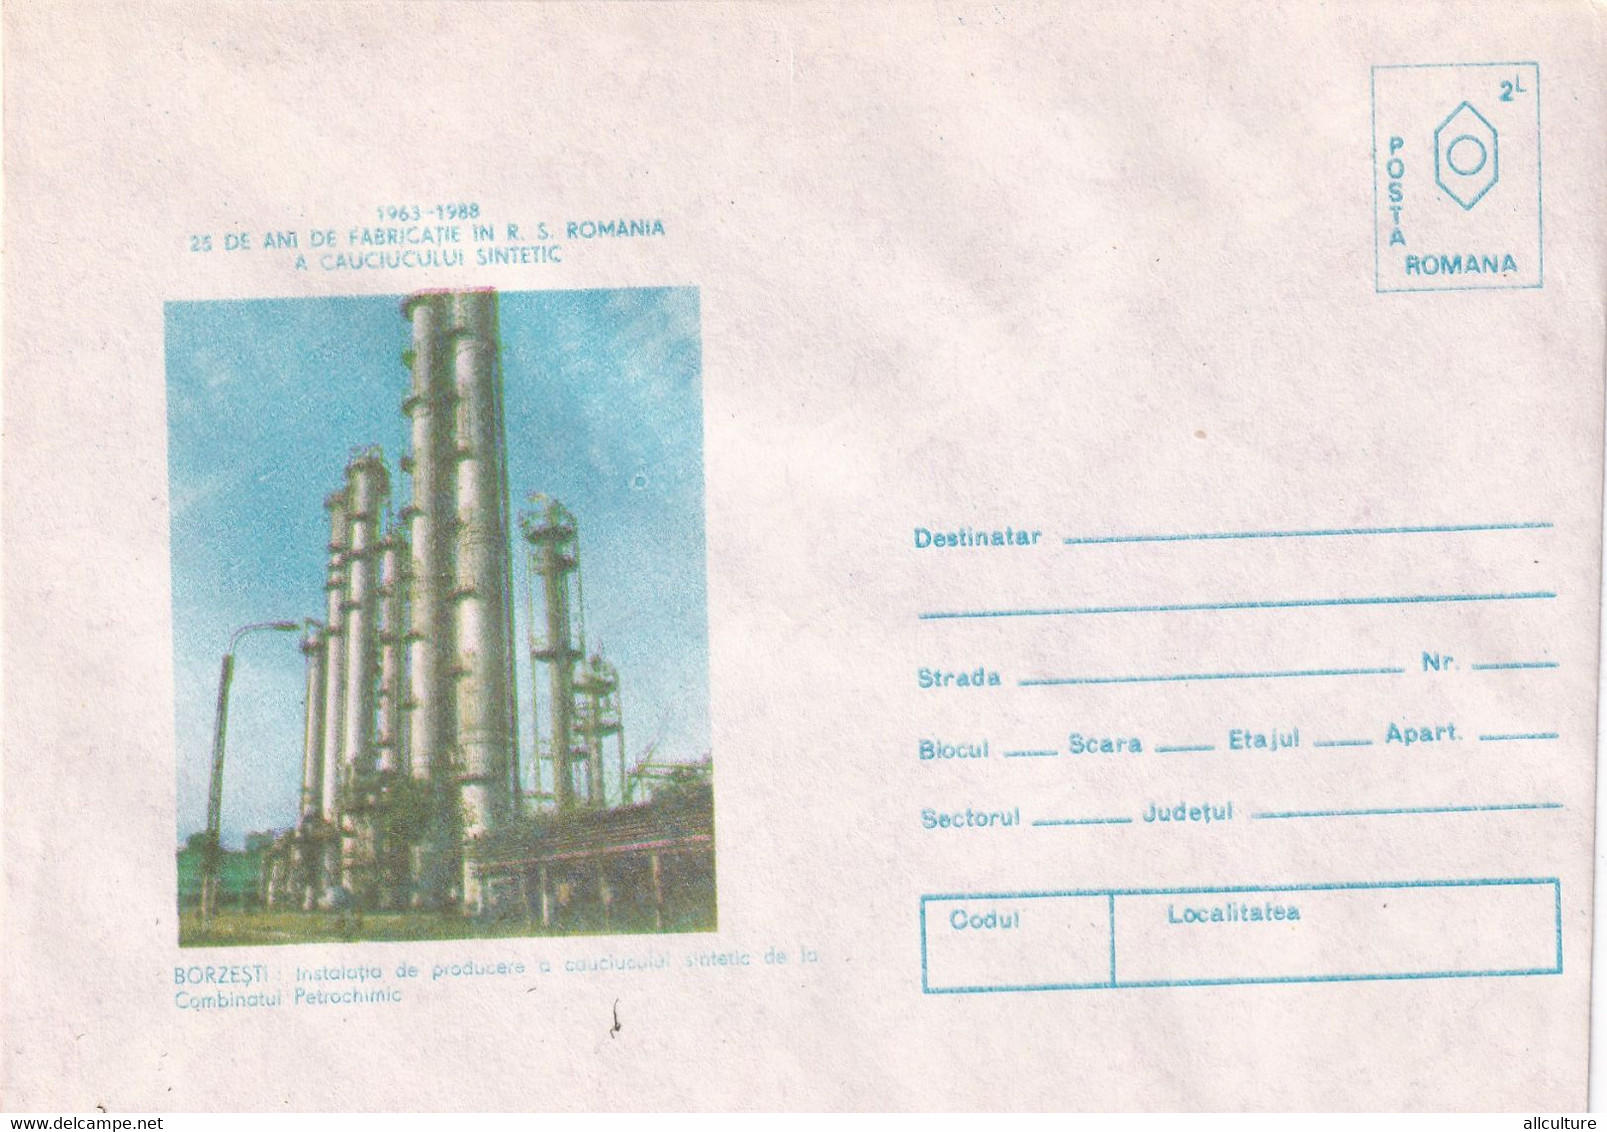 A3118 - 25 Years Of Manufacturing Synthetic Rubber, Petrochemical Plant, Borzesti  Romania Cover Stationery - Usines & Industries